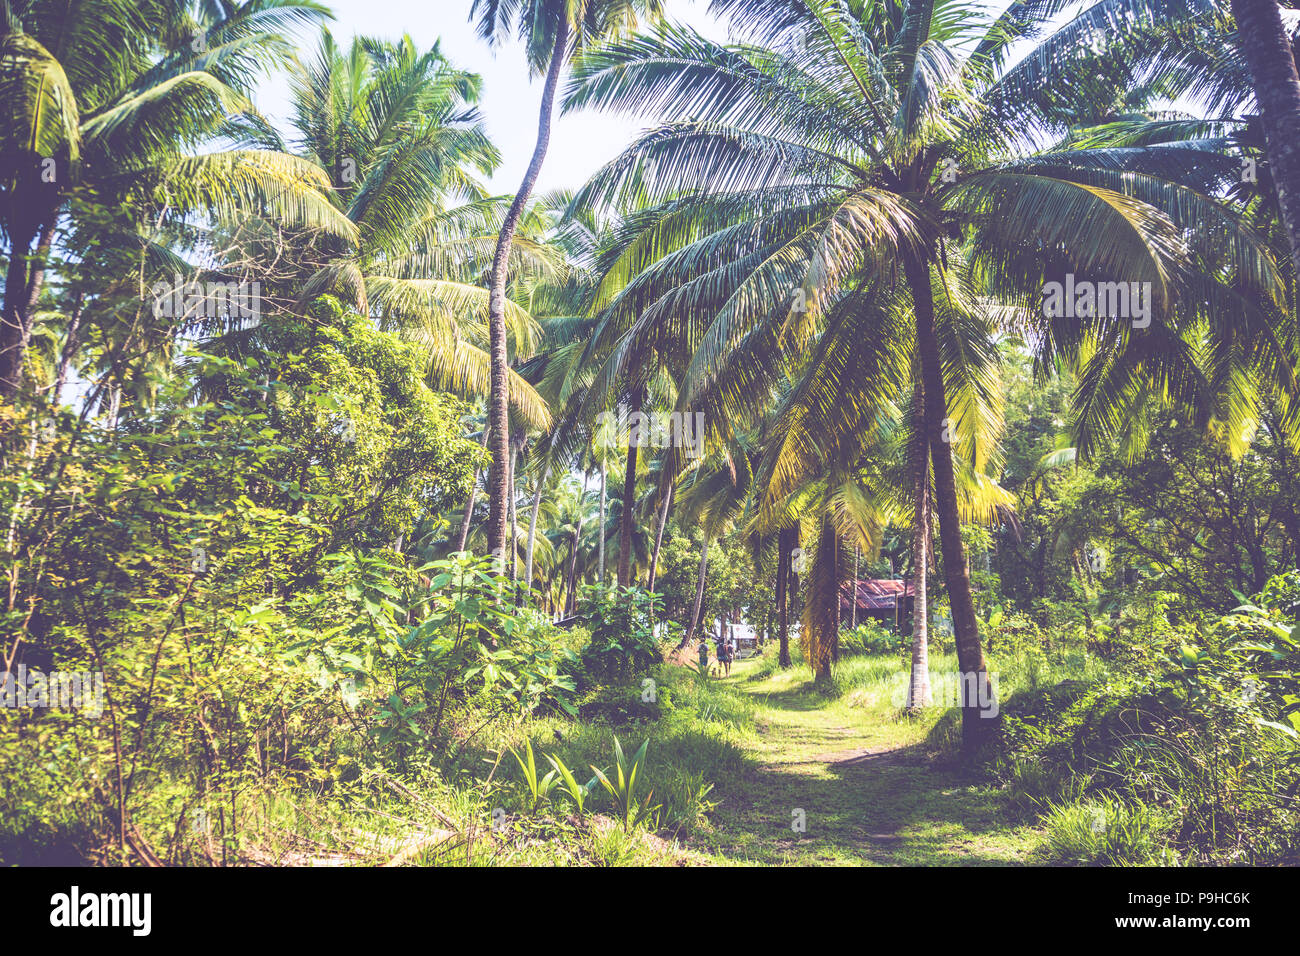 Densely growing trees in a palm grove. Green bushes and palm trees on an exotic island in the background. Stock Photo